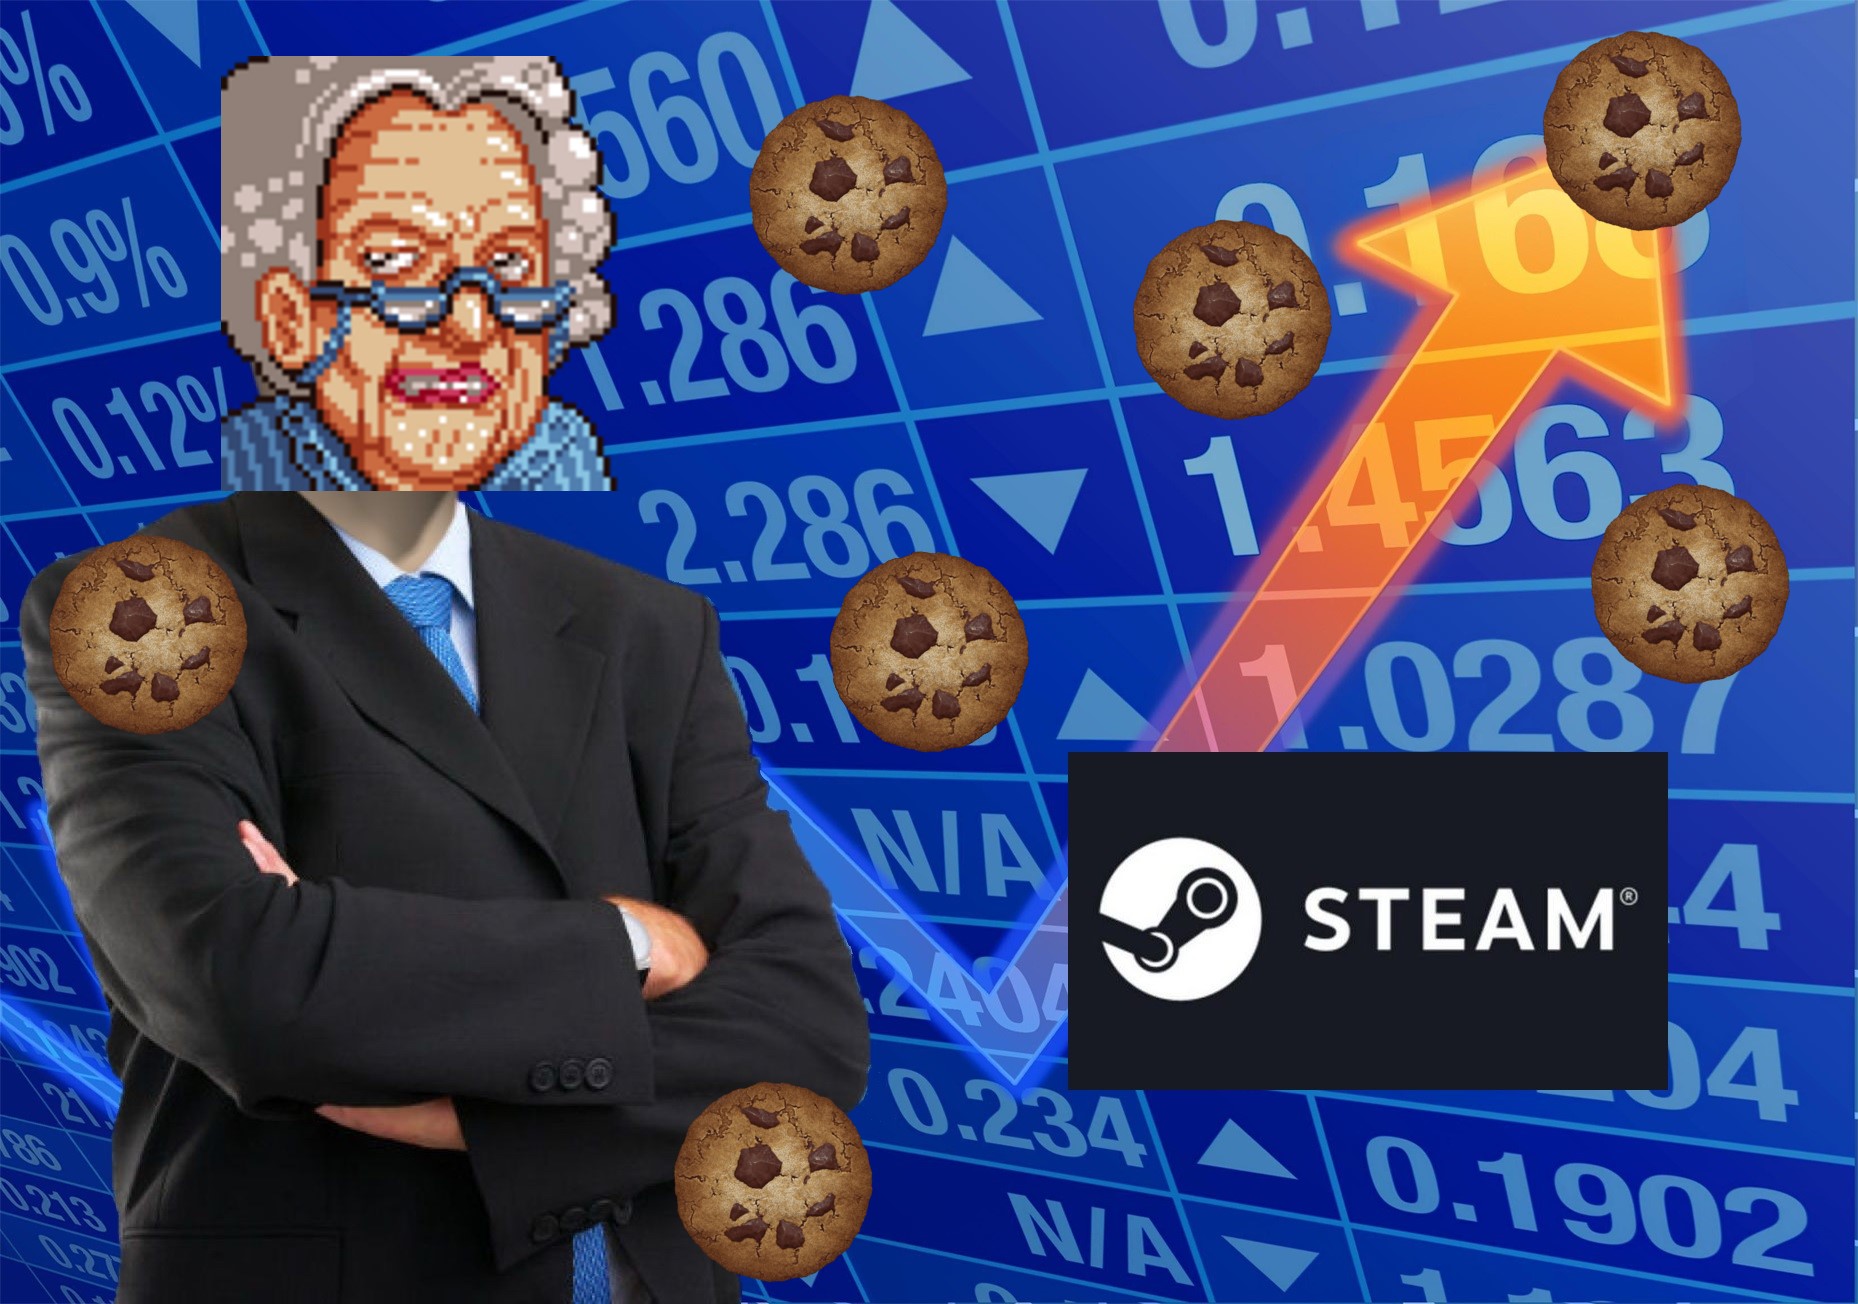 Cookie Clicker Is Still A Thing And It's Now On Steam